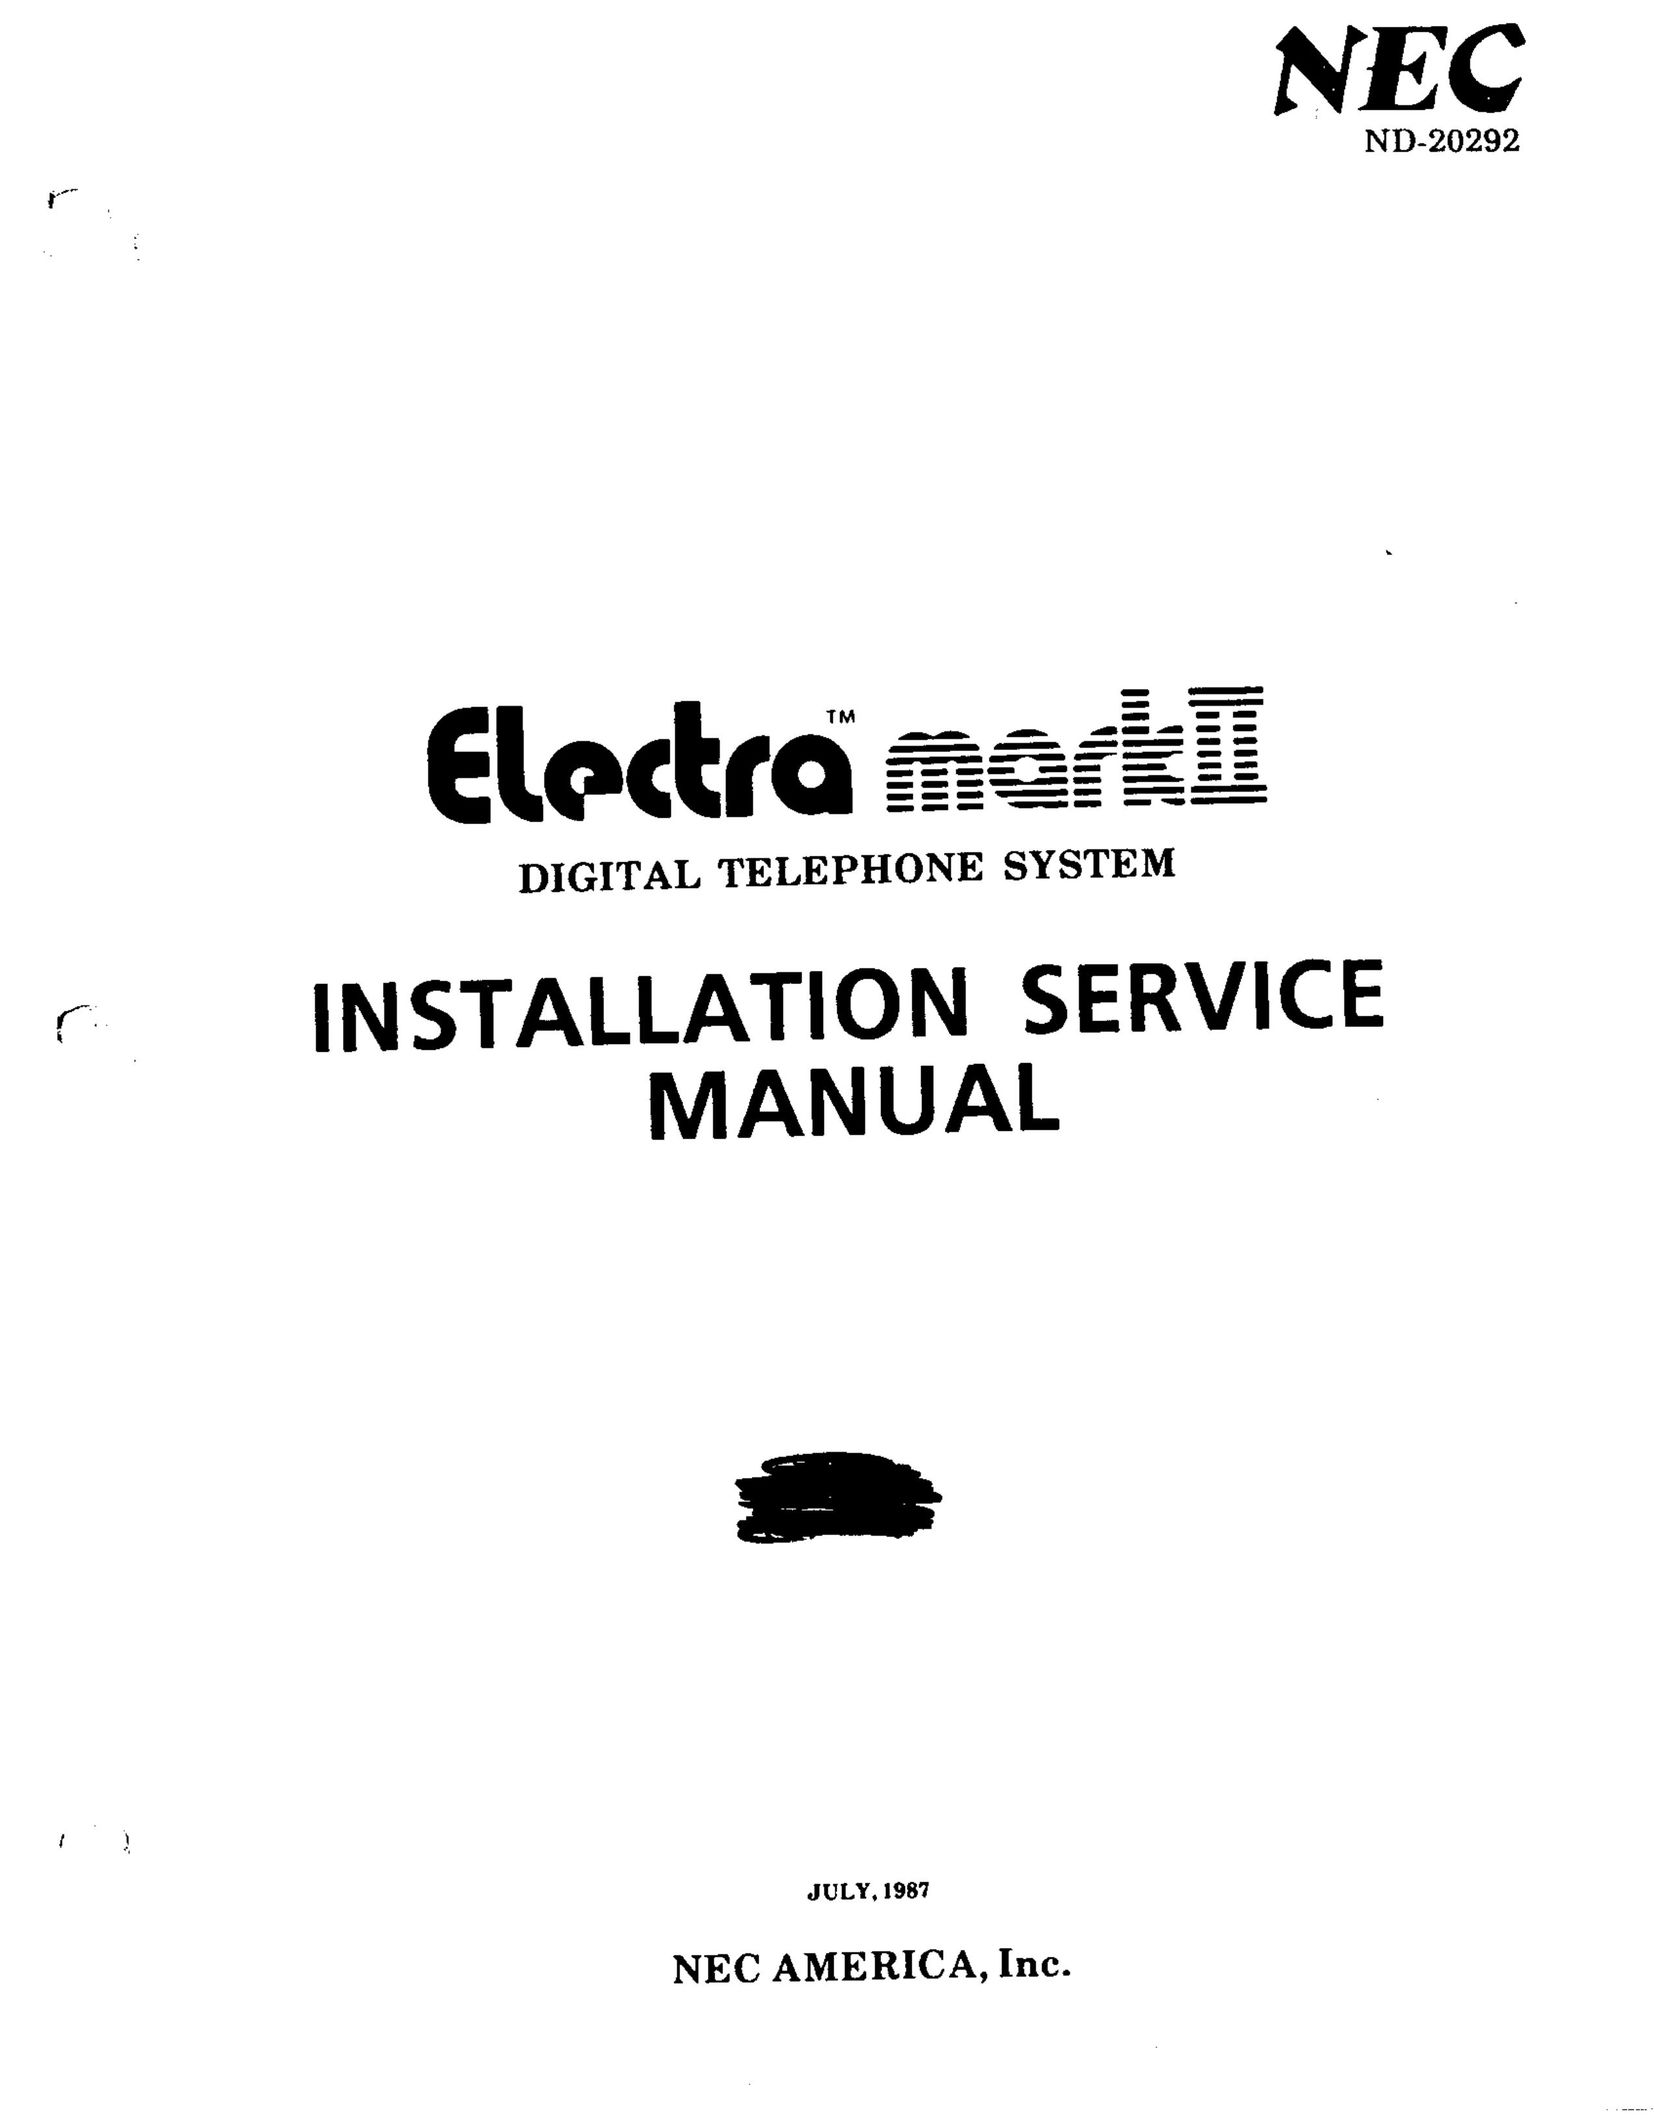 NEC nd-20292 Cell Phone User Manual